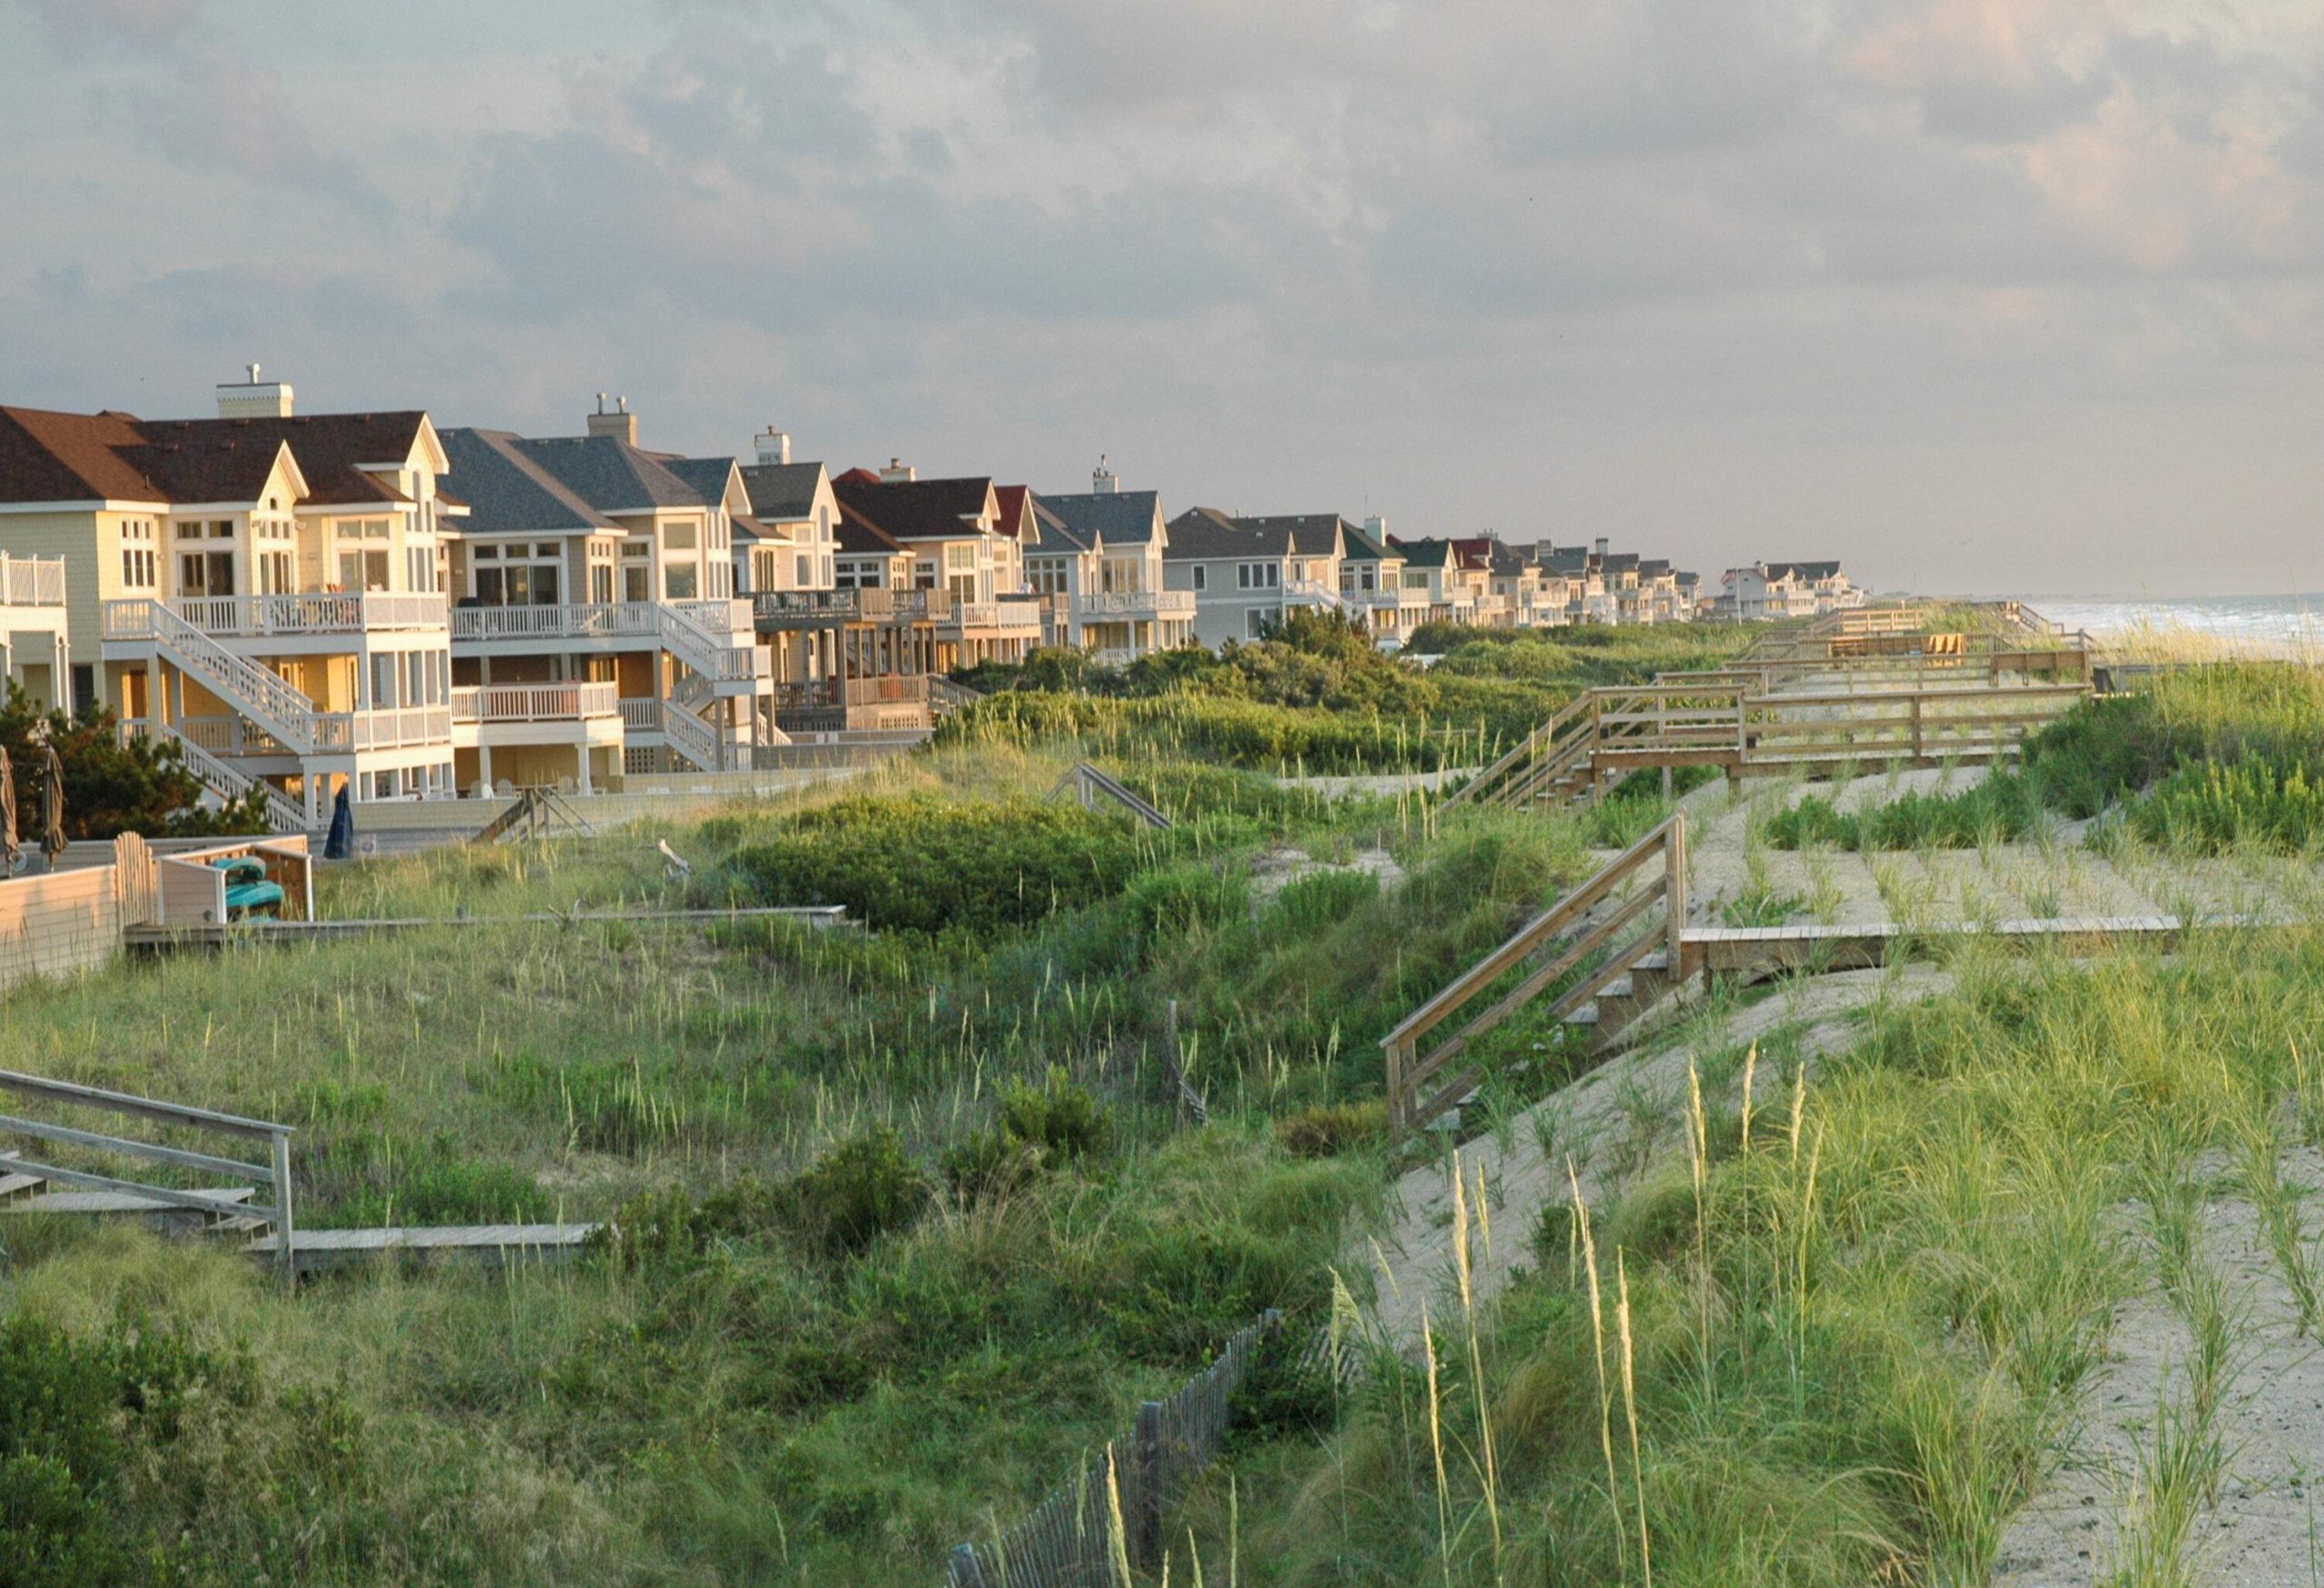 Tall wooden houses line up on the coast with access boardwalks in the bushy dunes to the sea.